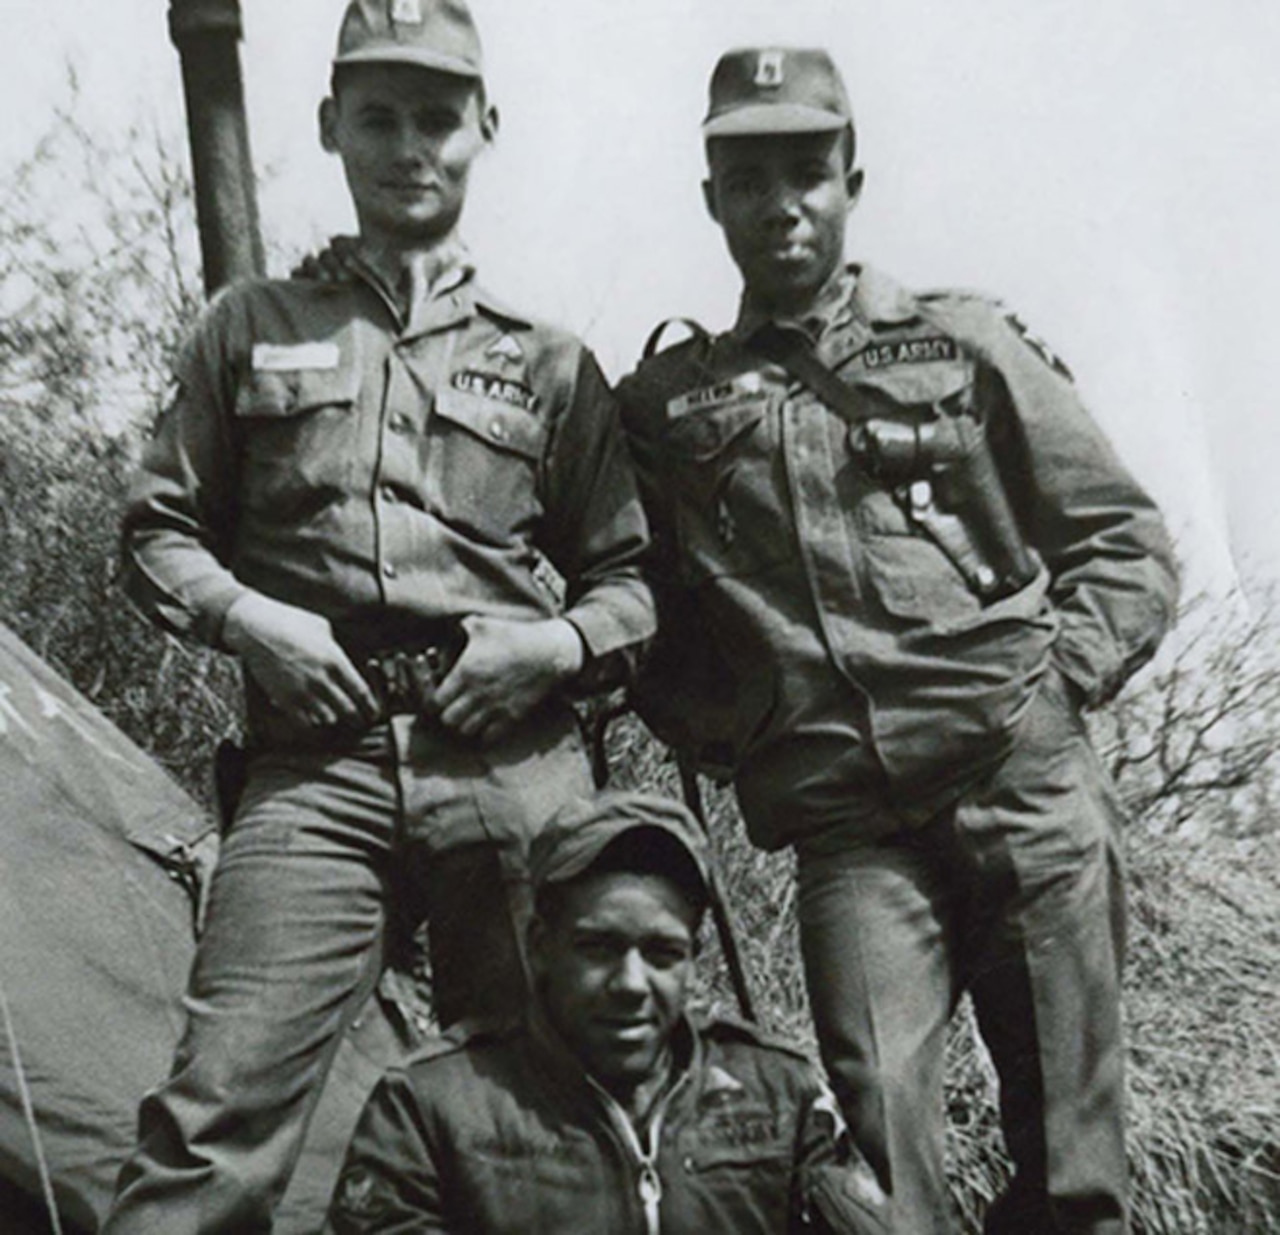 Three soldiers pose for a photo